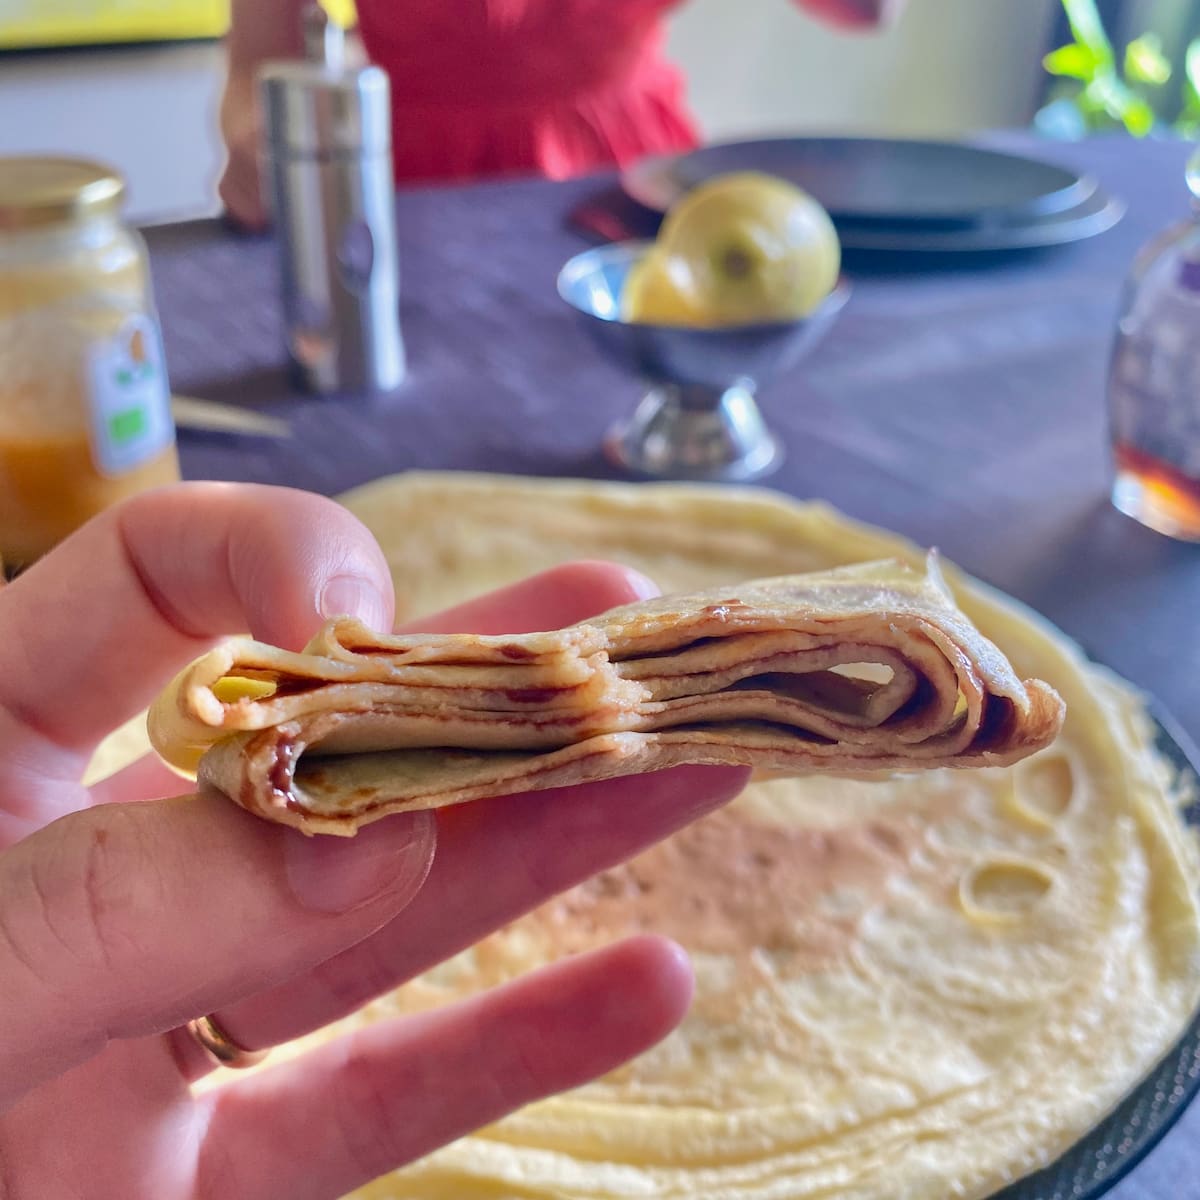 thin French crepe pancake folded over on itself, revealing a little chocolate spread inside